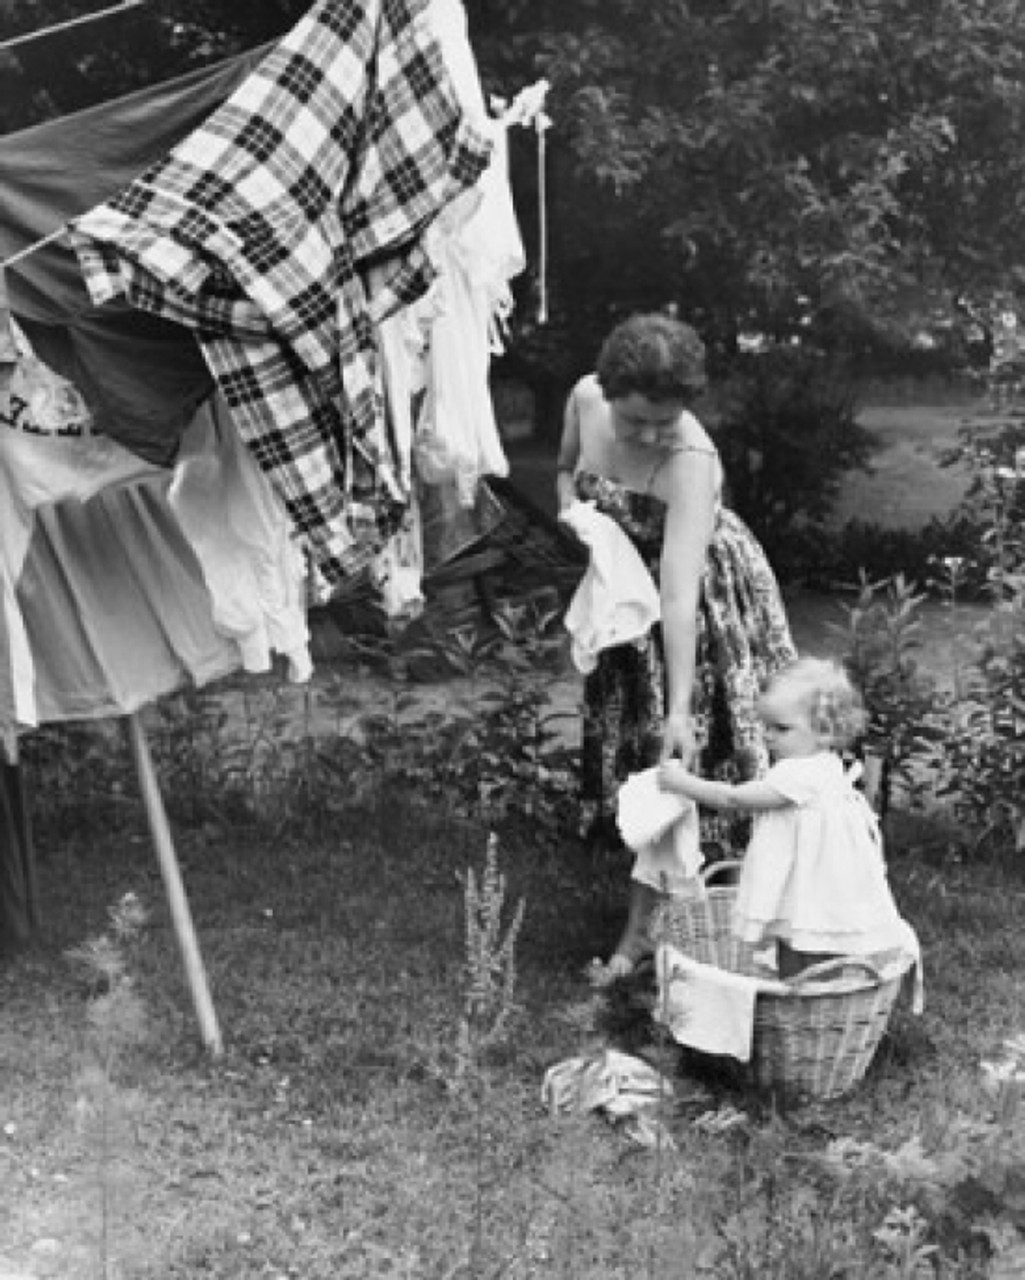 Little girl hanging clothes on clotheslines outside, children's